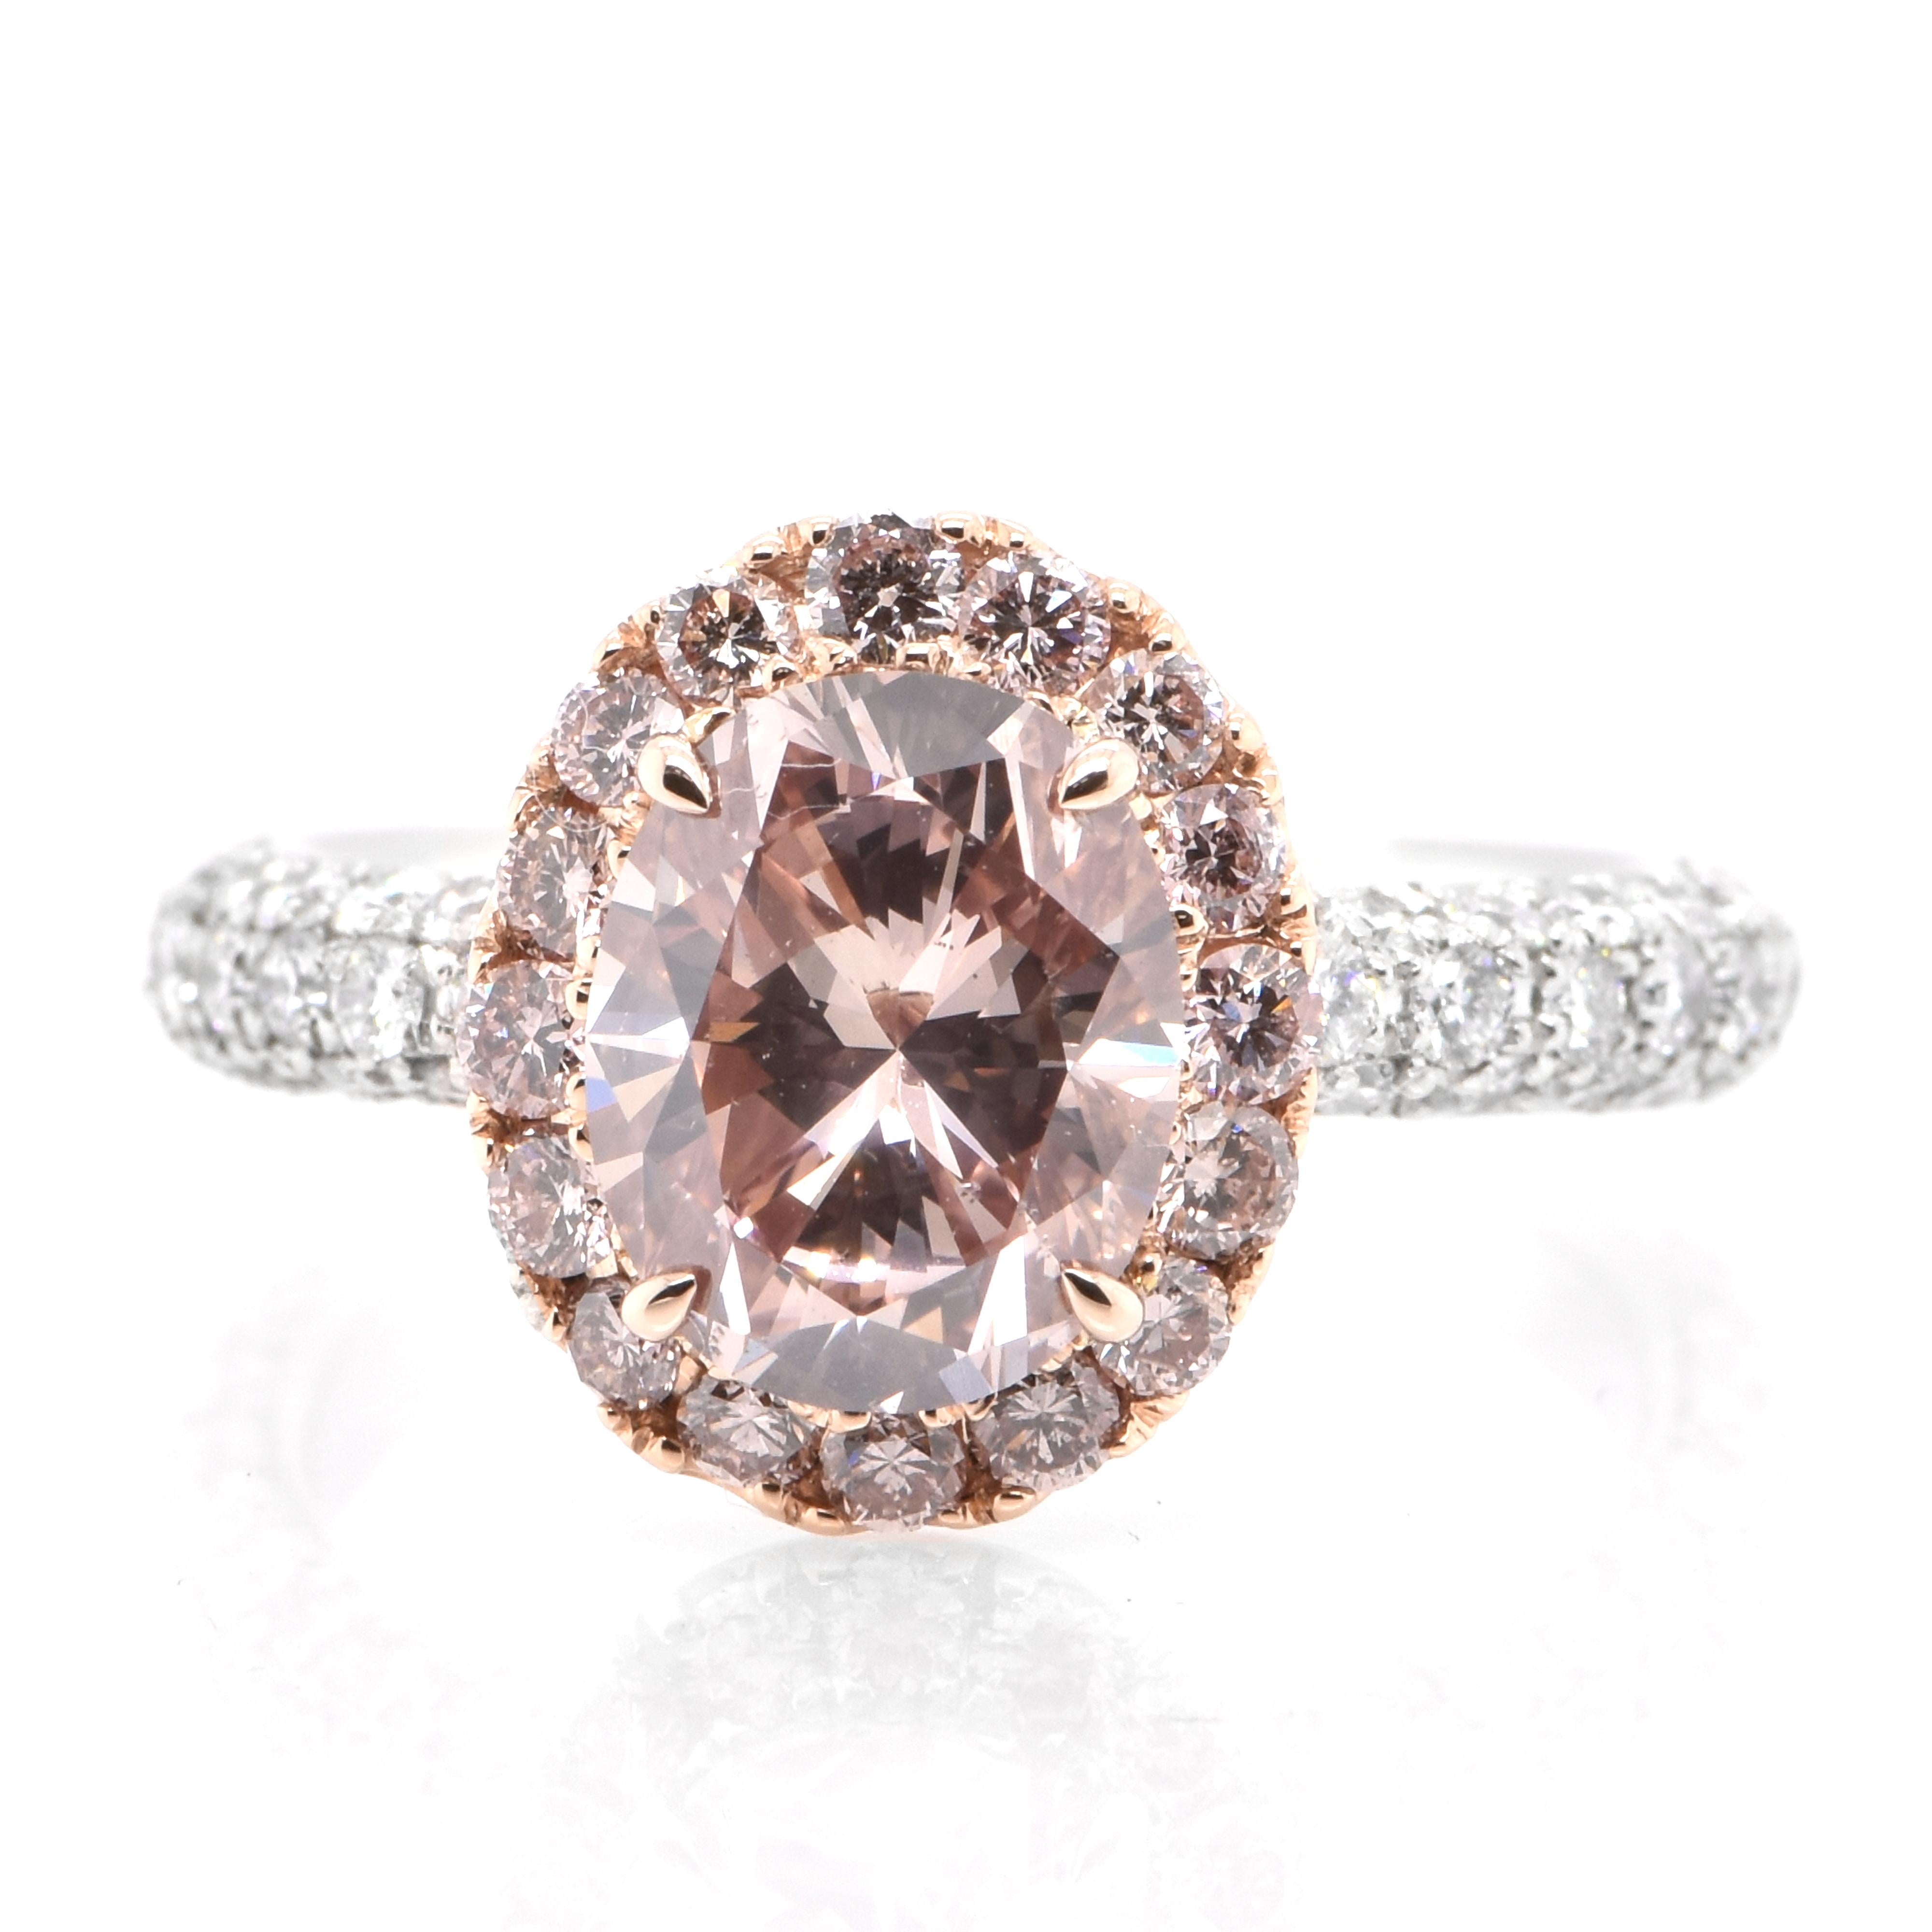 A beautiful ring featuring a CGL Certified Natural 2.245 Carat Fancy Deep Orangish Pink Diamond and 1.30 Carats Diamond accents Ring set in Platinum and 18 Karat Pink Gold. Diamonds have been adorned and cherished throughout human history and date